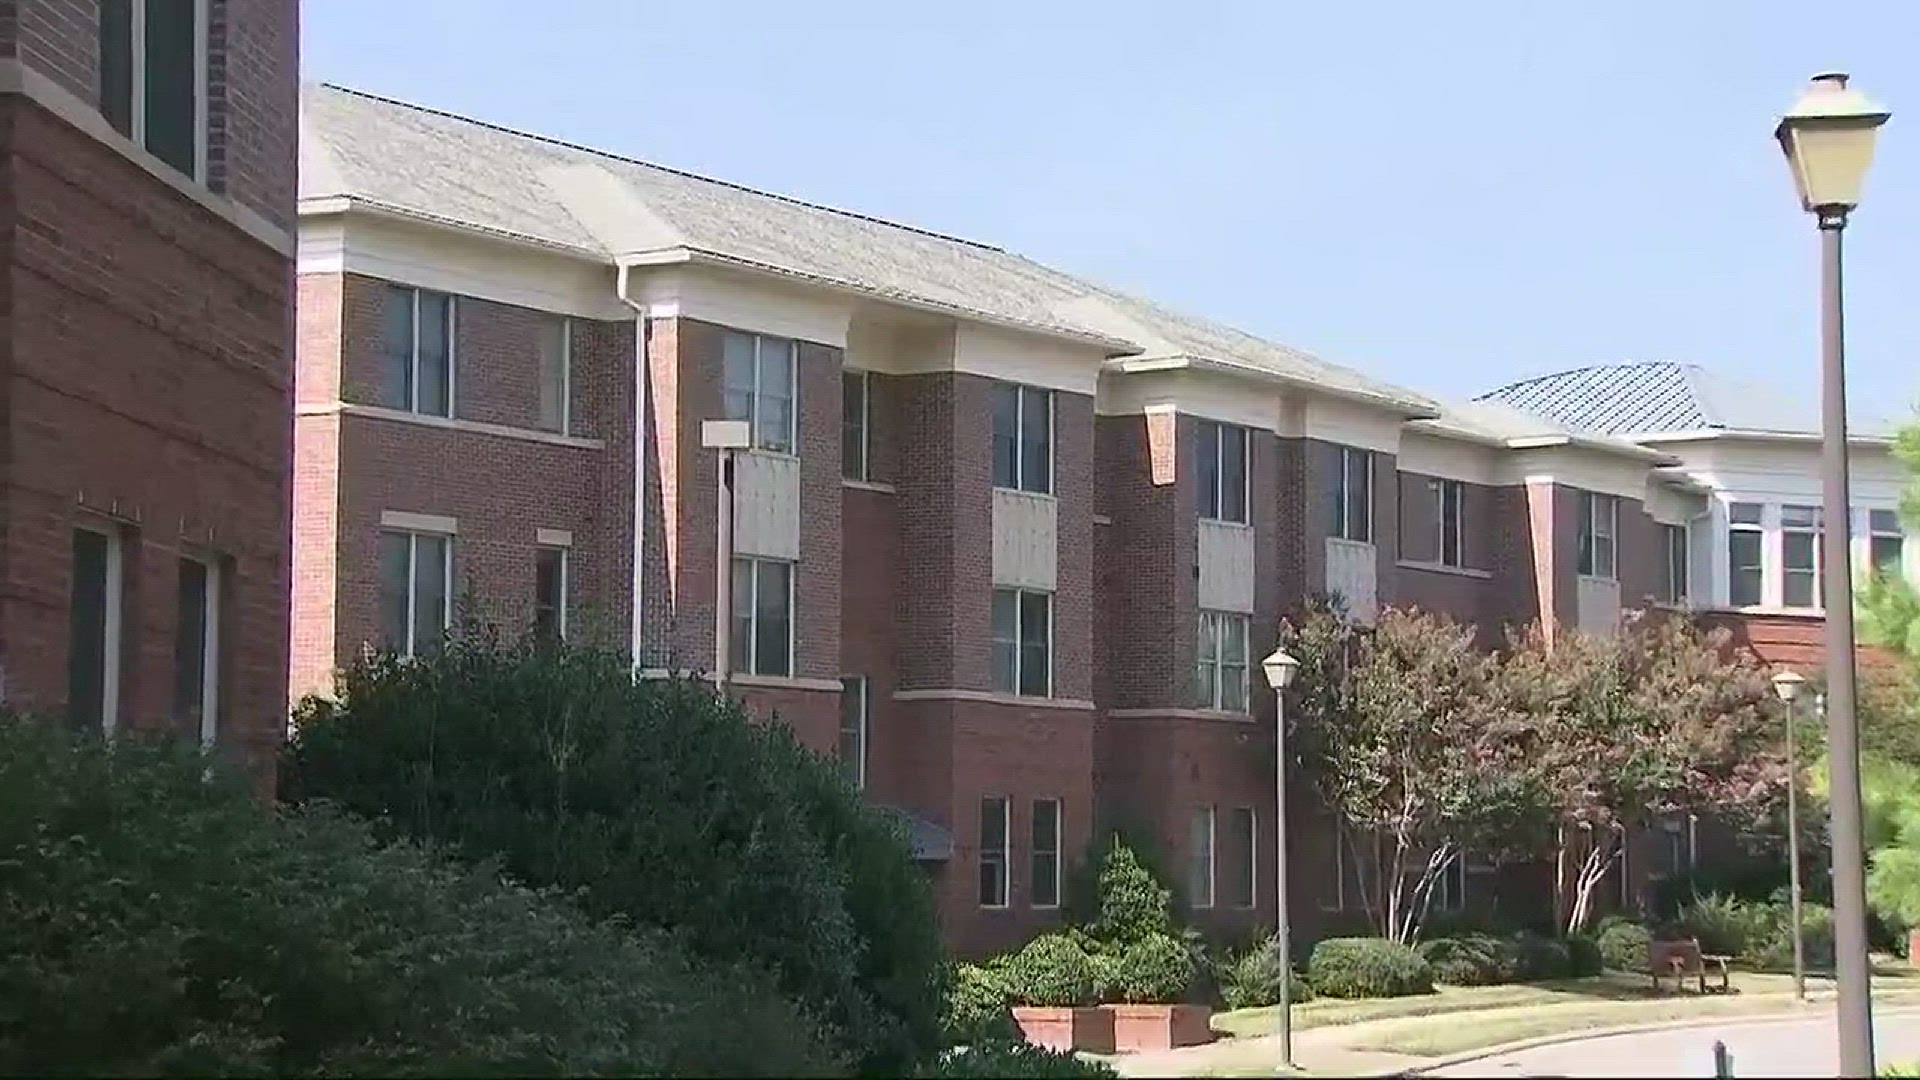 Police at the University of North Carolina at Chapel Hill are investigating a domestic violence incident that resulted in the death of one person and injured two others on Sunday.